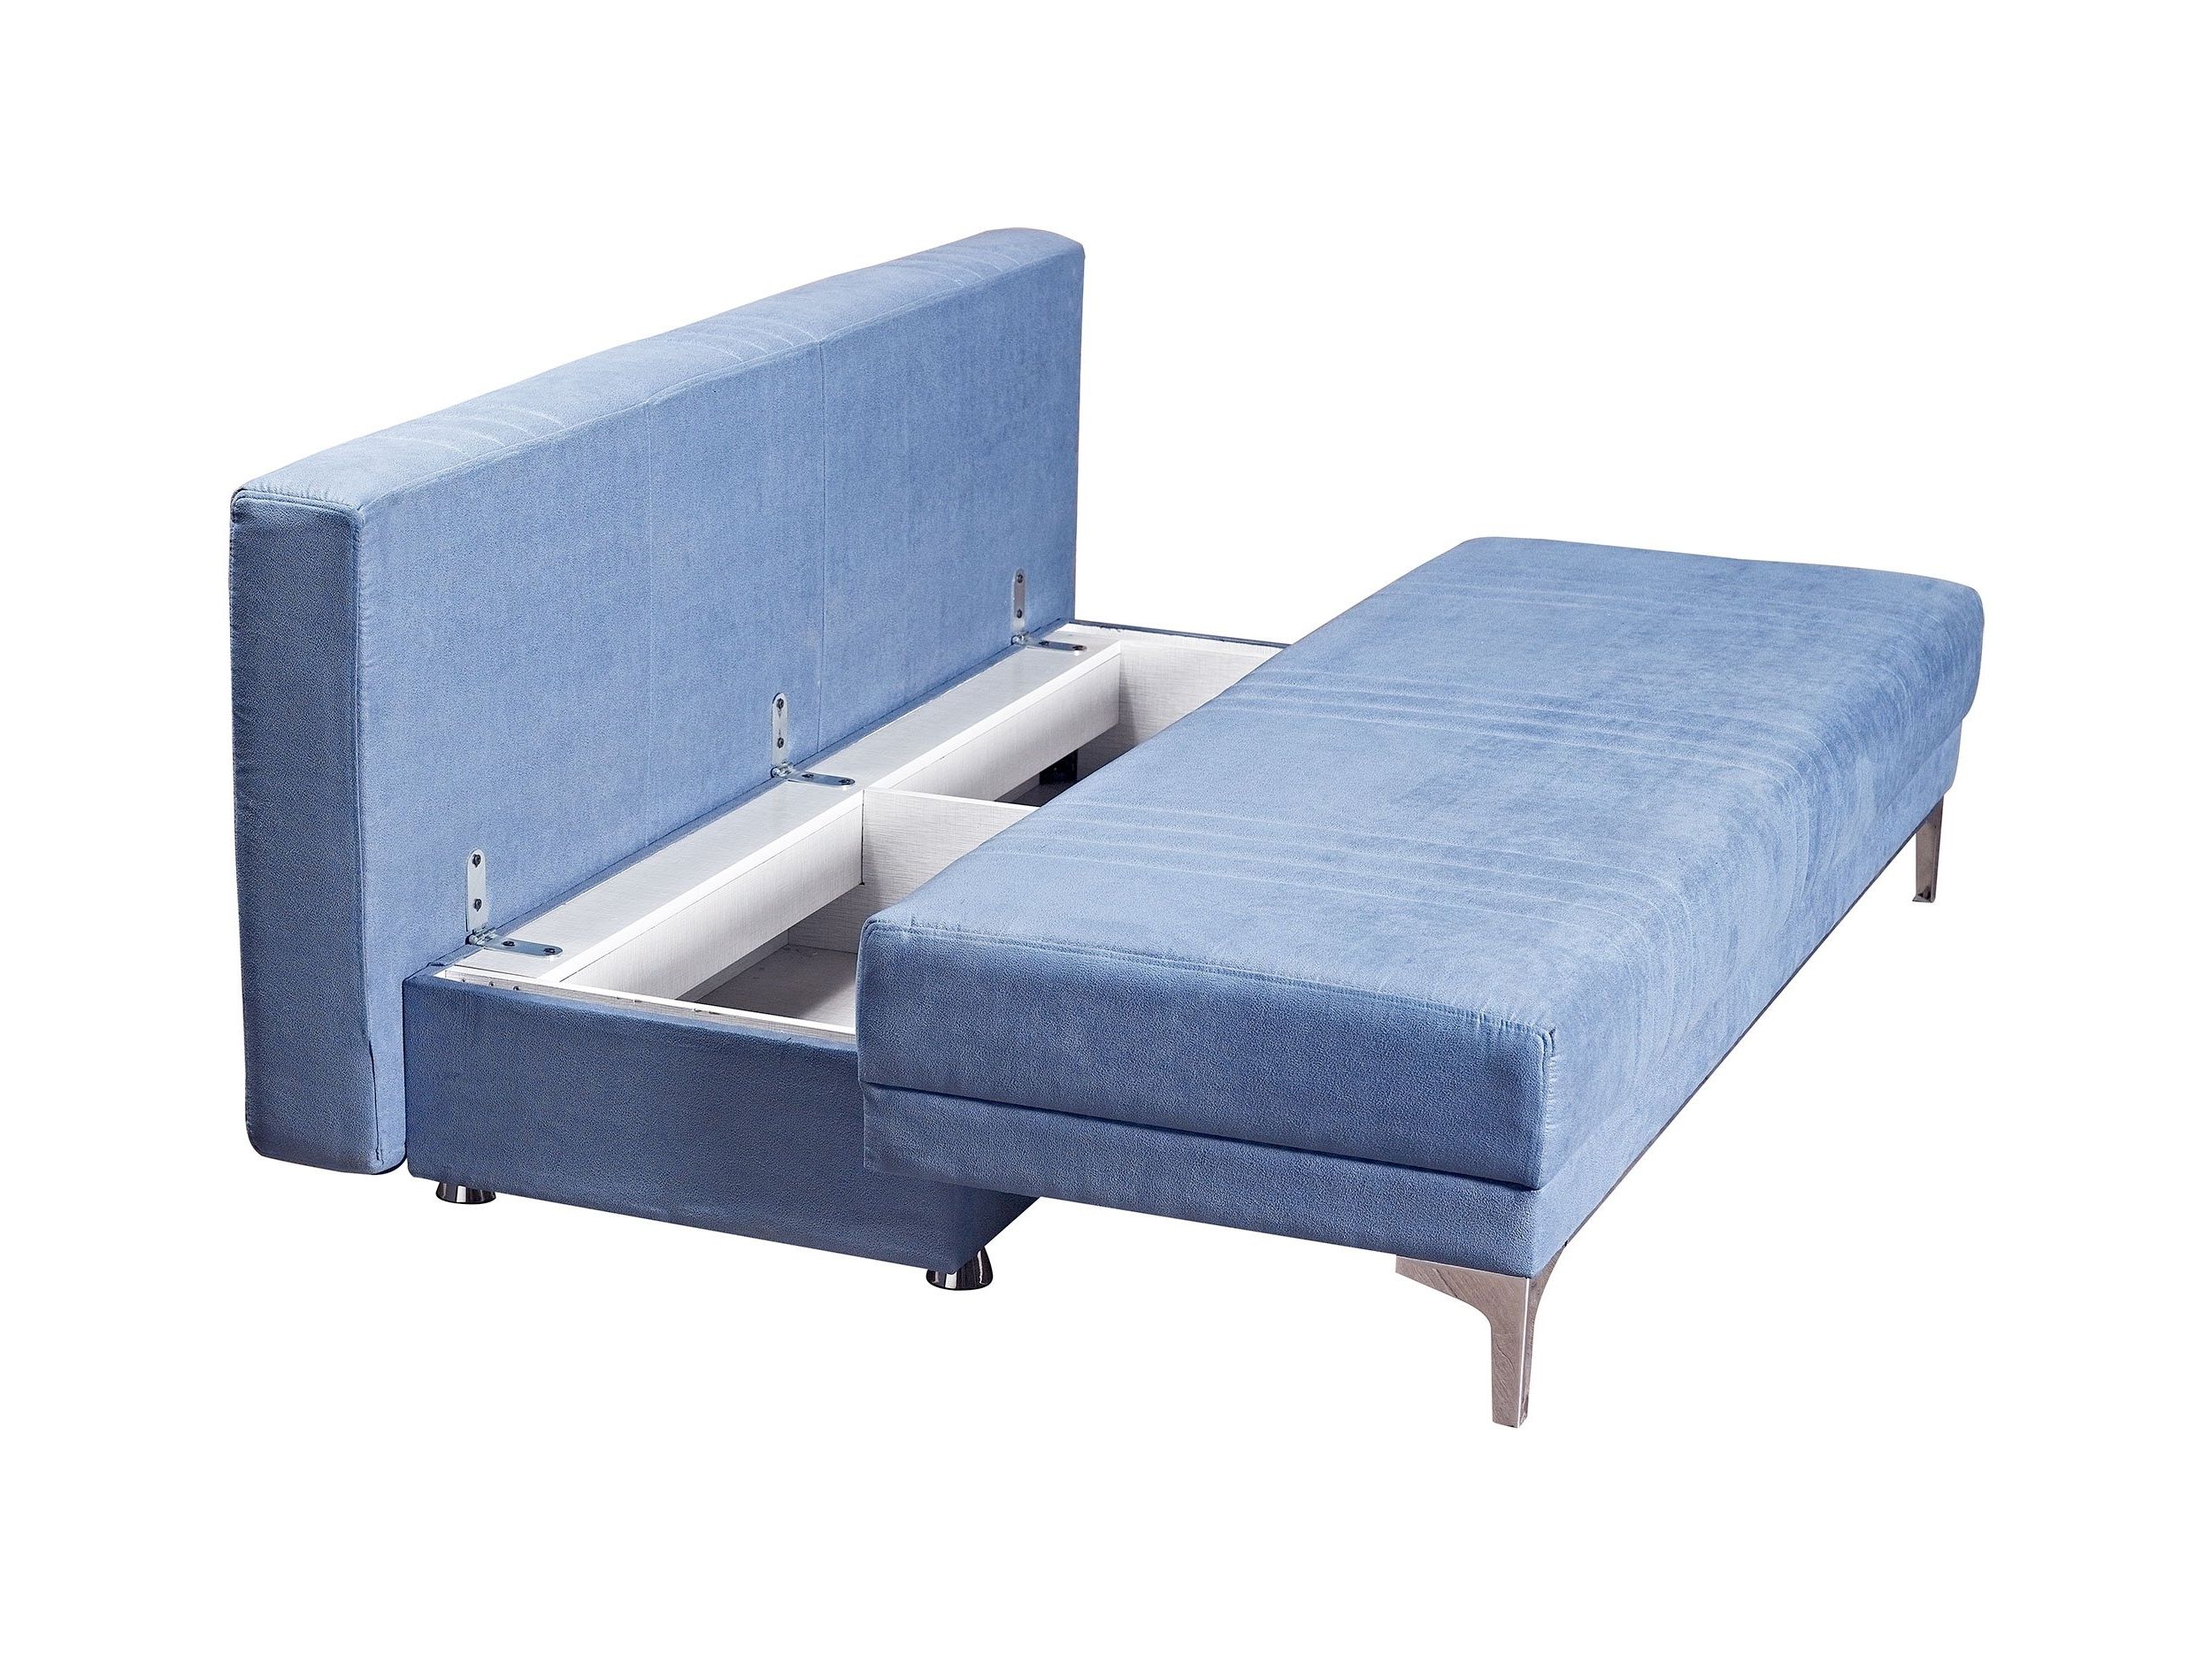 Newest Europa Vintage Blue Queen Size Sofa Bedmobista Inside Queen Size Sofas (View 11 of 15)